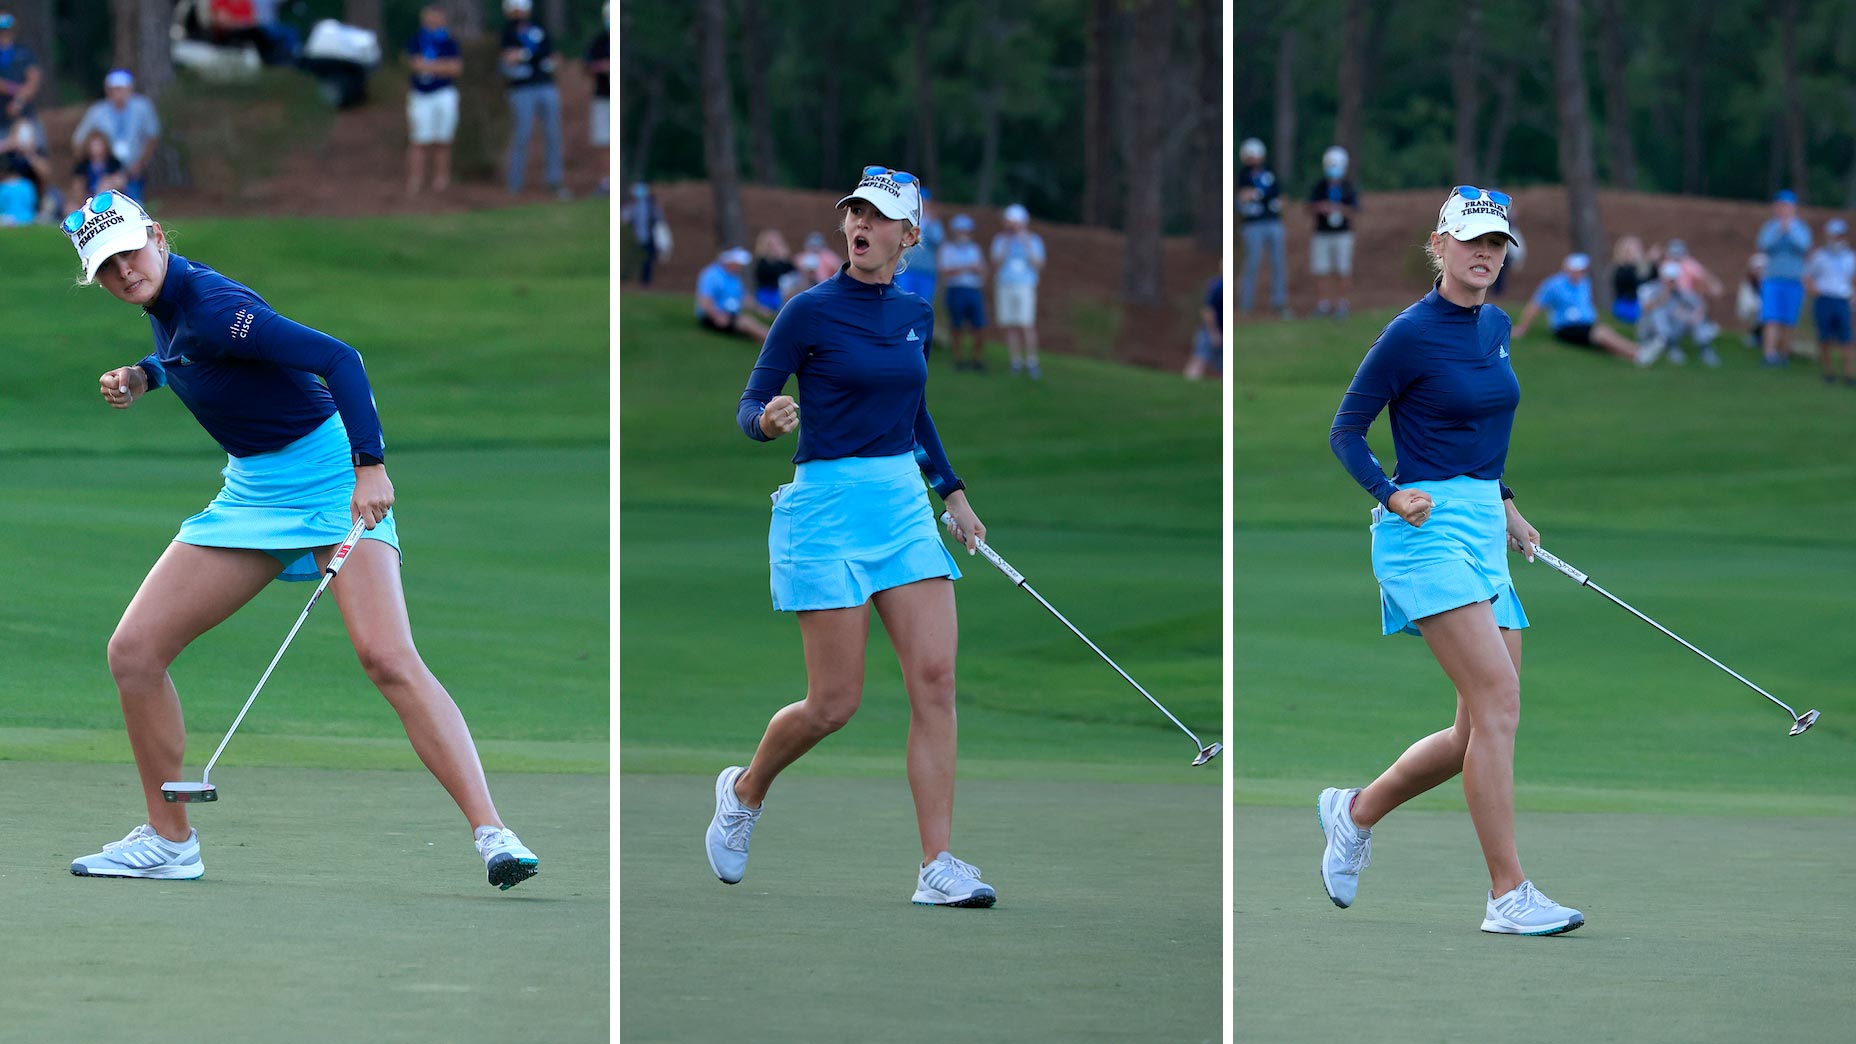 Jessica Korda just delivered the best imaginable start to the LPGA season.